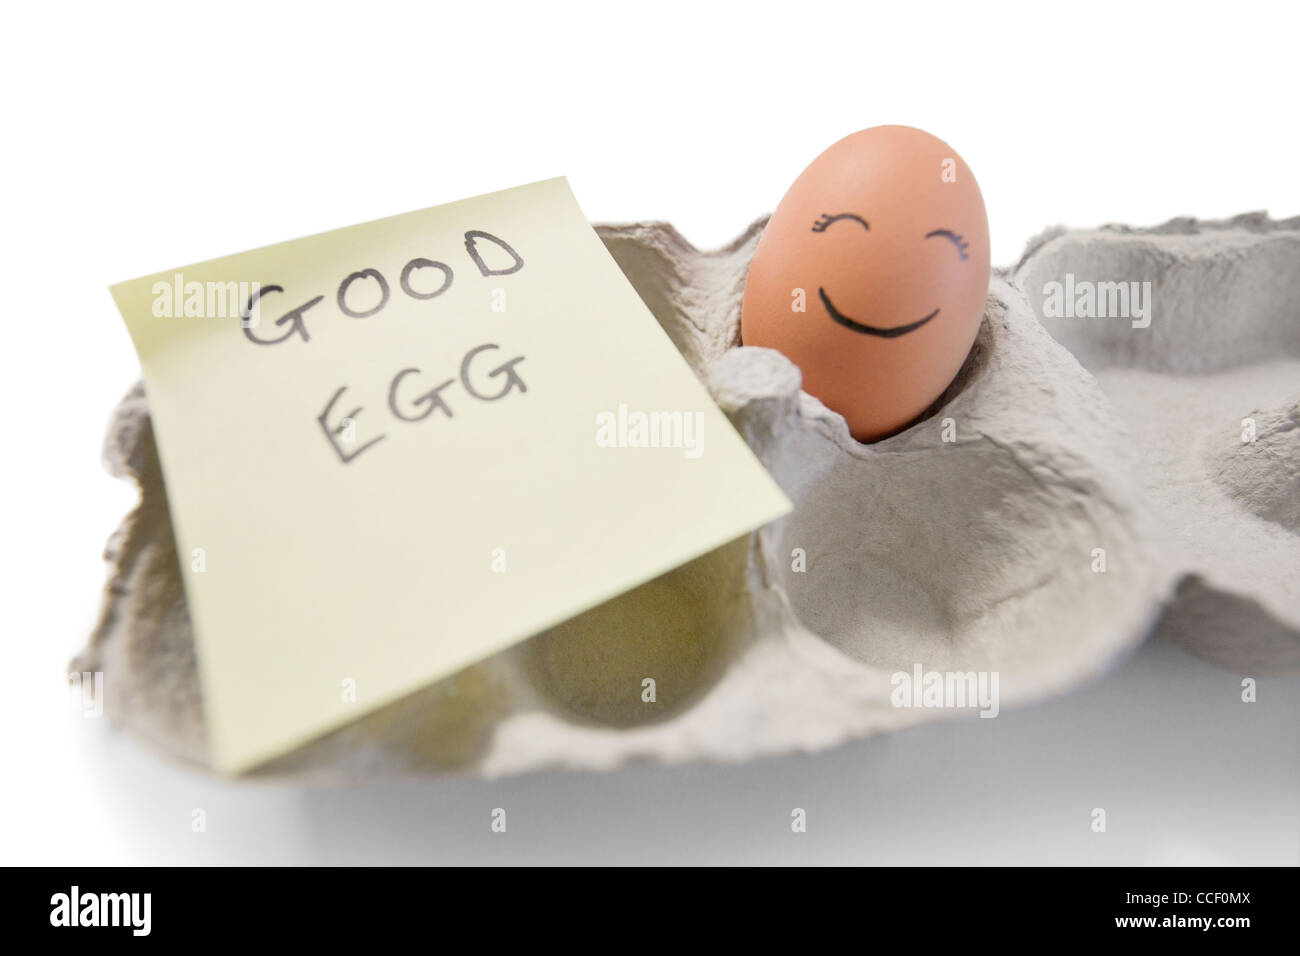 Happy egg with a note written 'good egg' Stock Photo